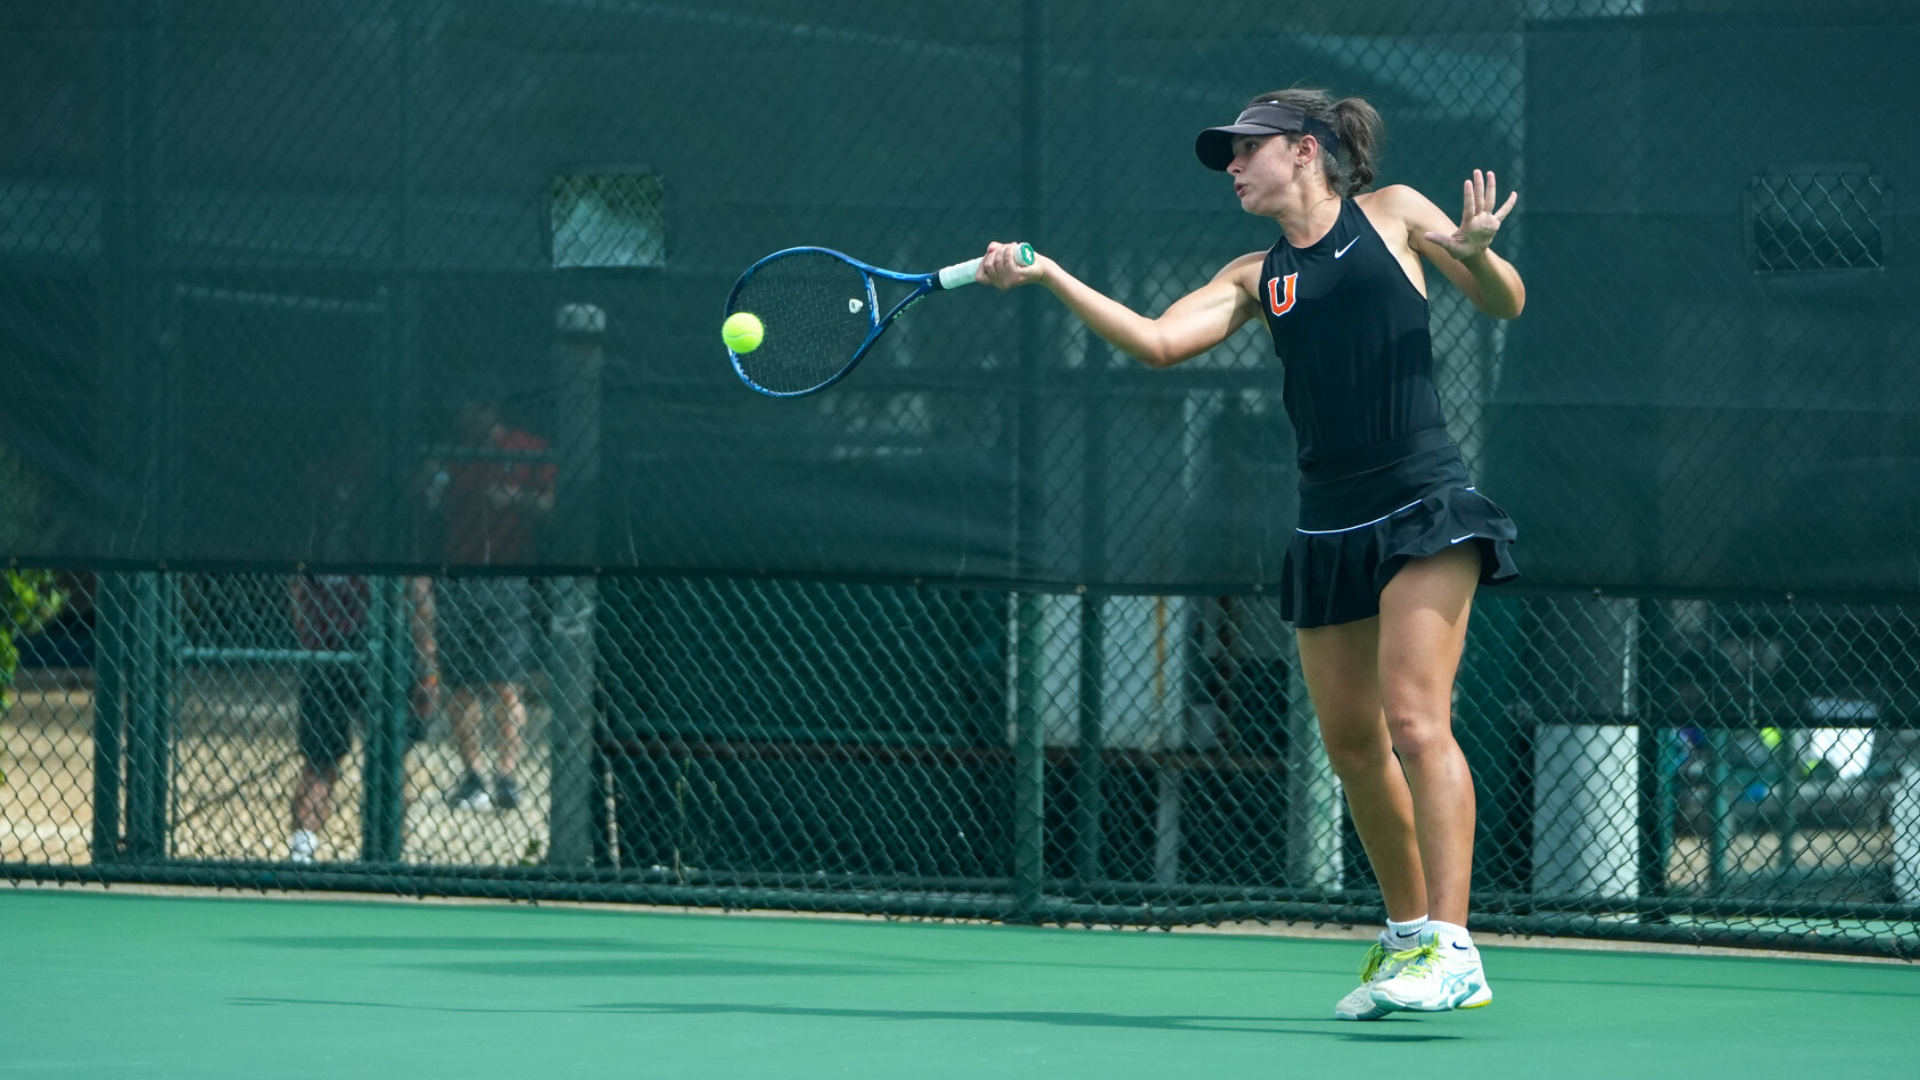 The Bulldogs advance to Second Round of NAIA Women&rsquo;s Tennis National Championship